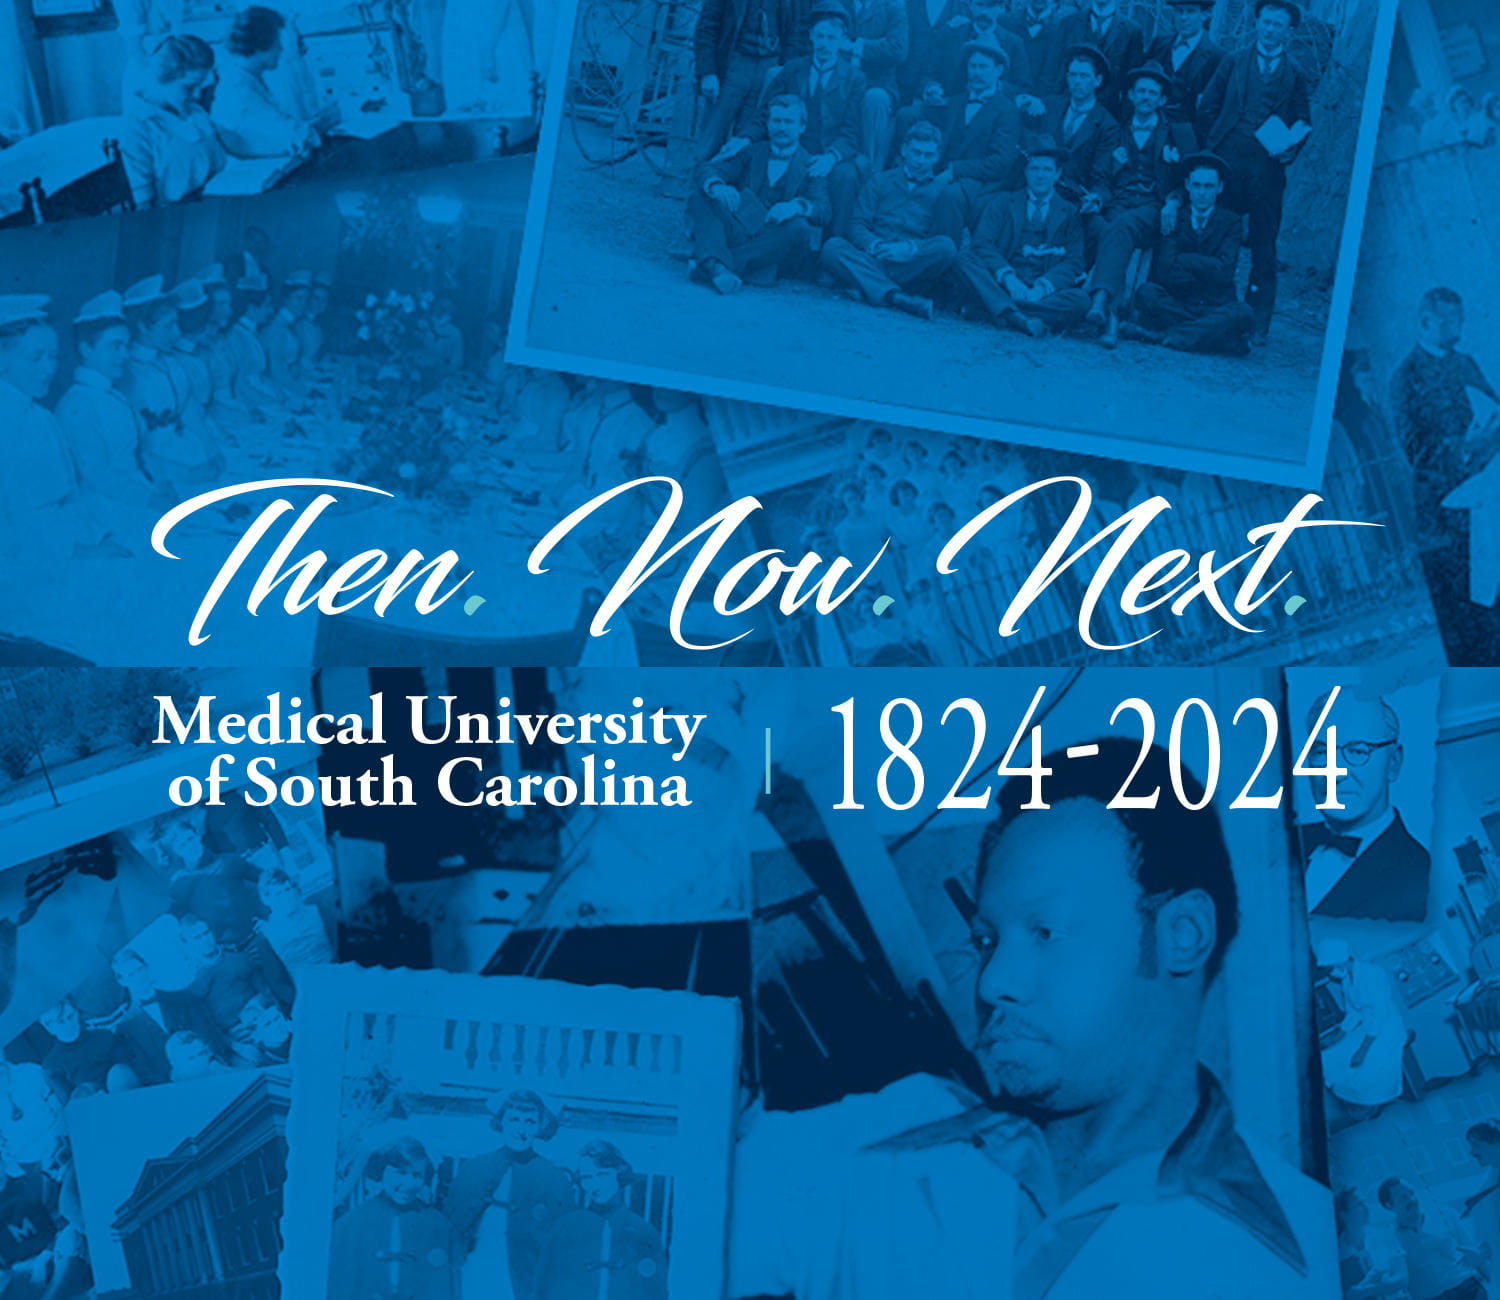 Collage of historical photographs on a blue background with the following text superimposed: Then. Now. Next. Medical University of South Carolina 1824 to 2024